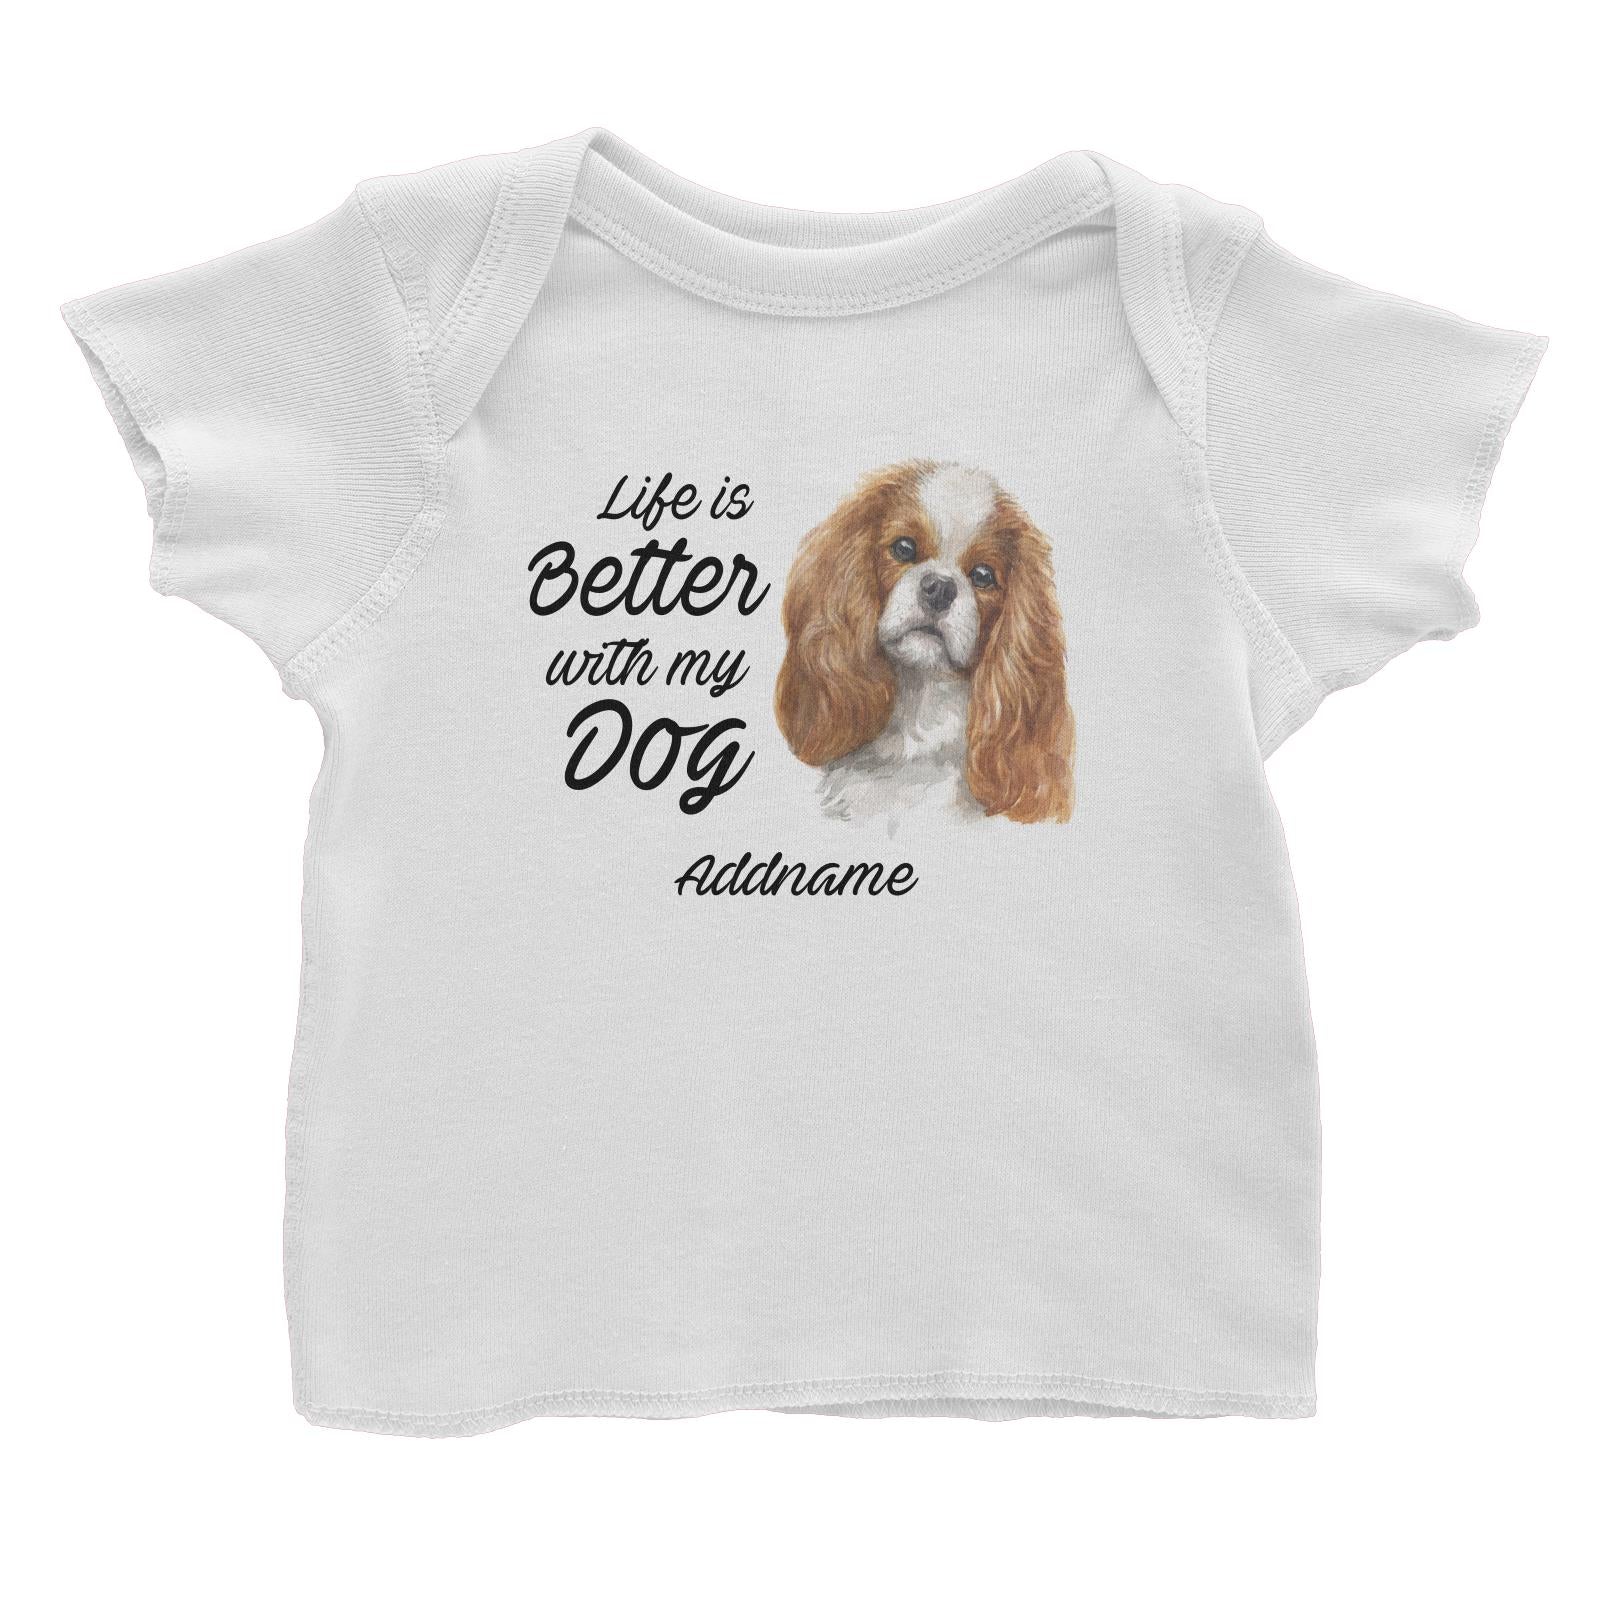 Watercolor Life is Better With My Dog King Charles Spaniel Curly Addname Baby T-Shirt